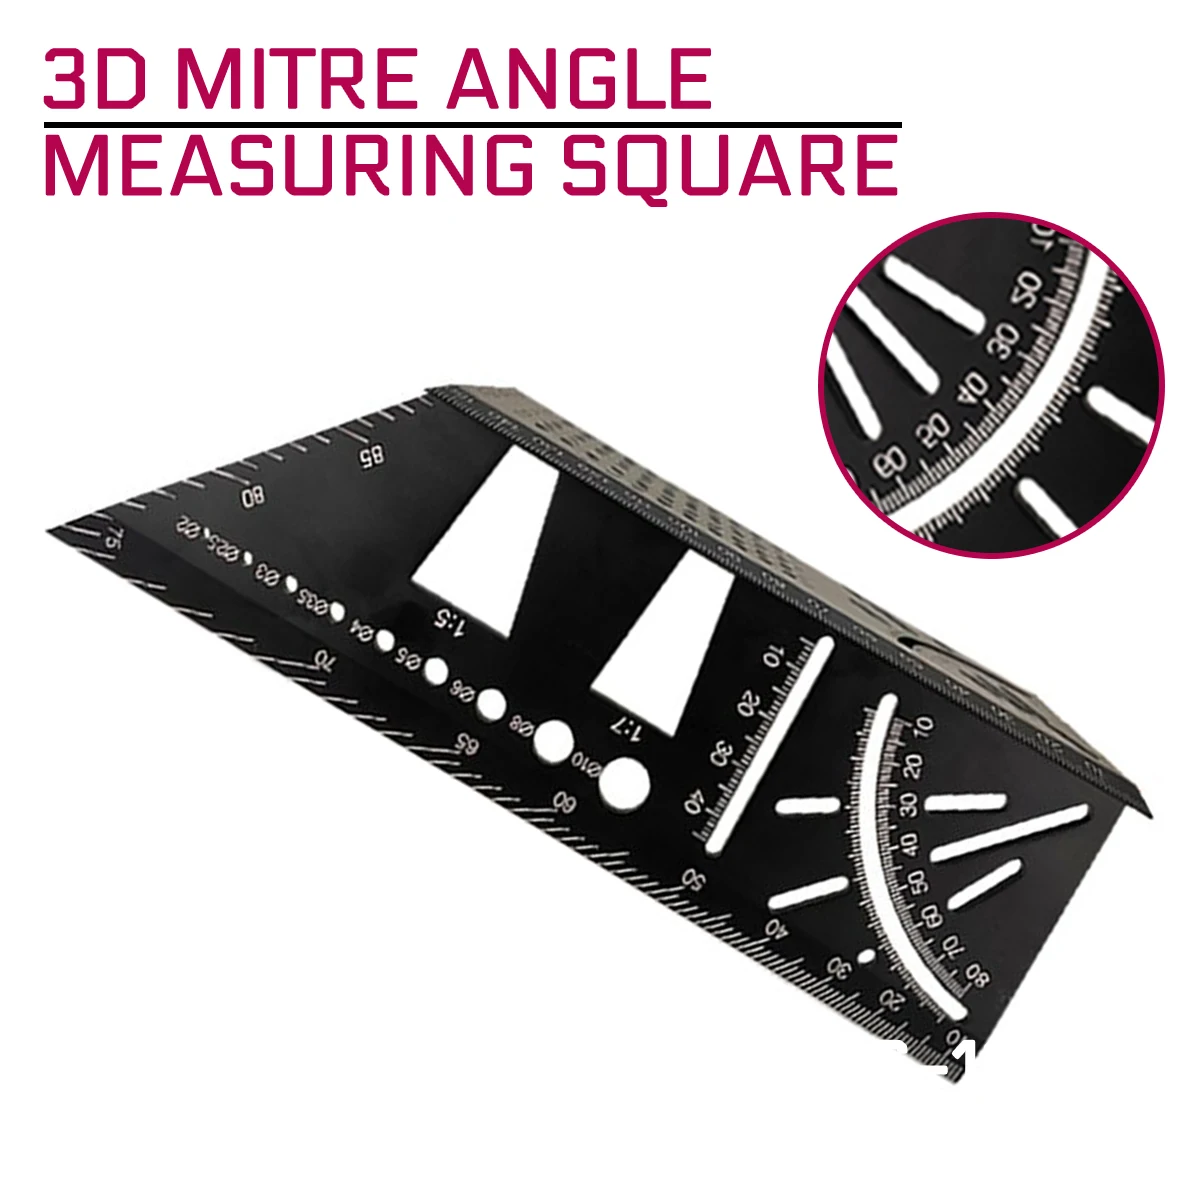 

3D Mitre 45 90 Degree Angle Ruler Angle Measuring Square Aluminum Alloy Punctuation Marking Gauge Framing Protractor Woodworking